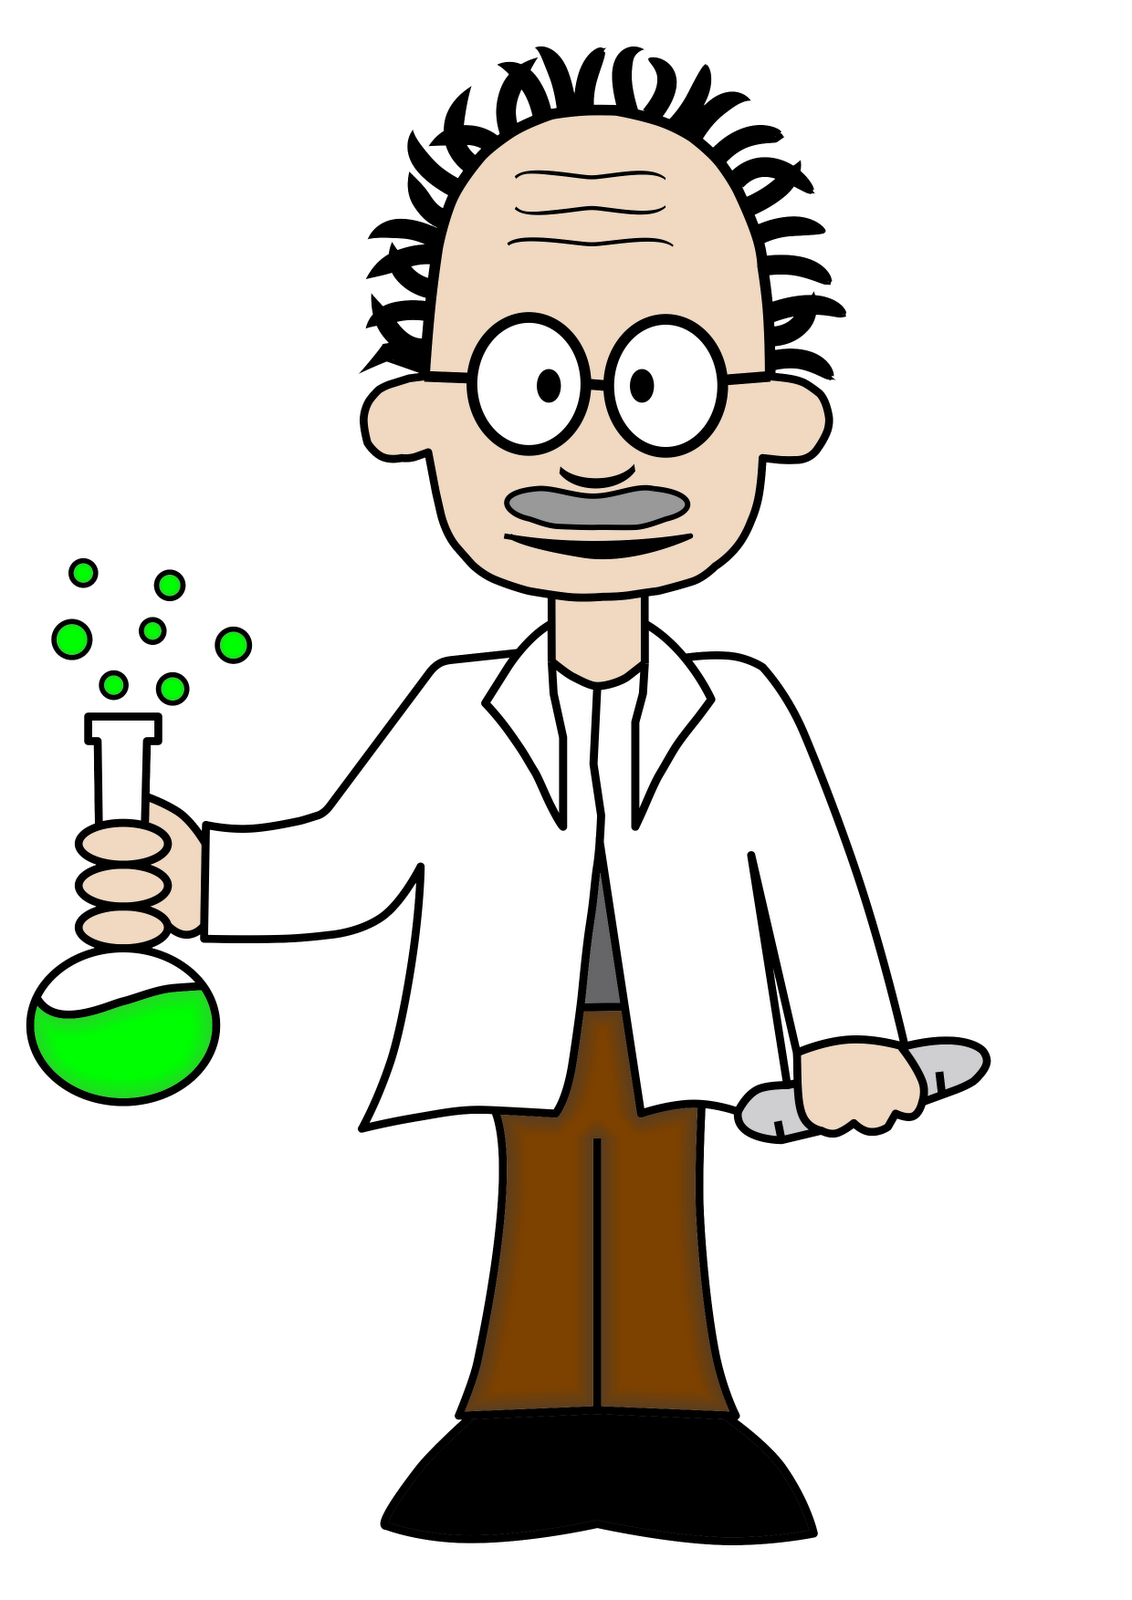 Science Cartoon Images | Free Download Clip Art | Free Clip Art ...